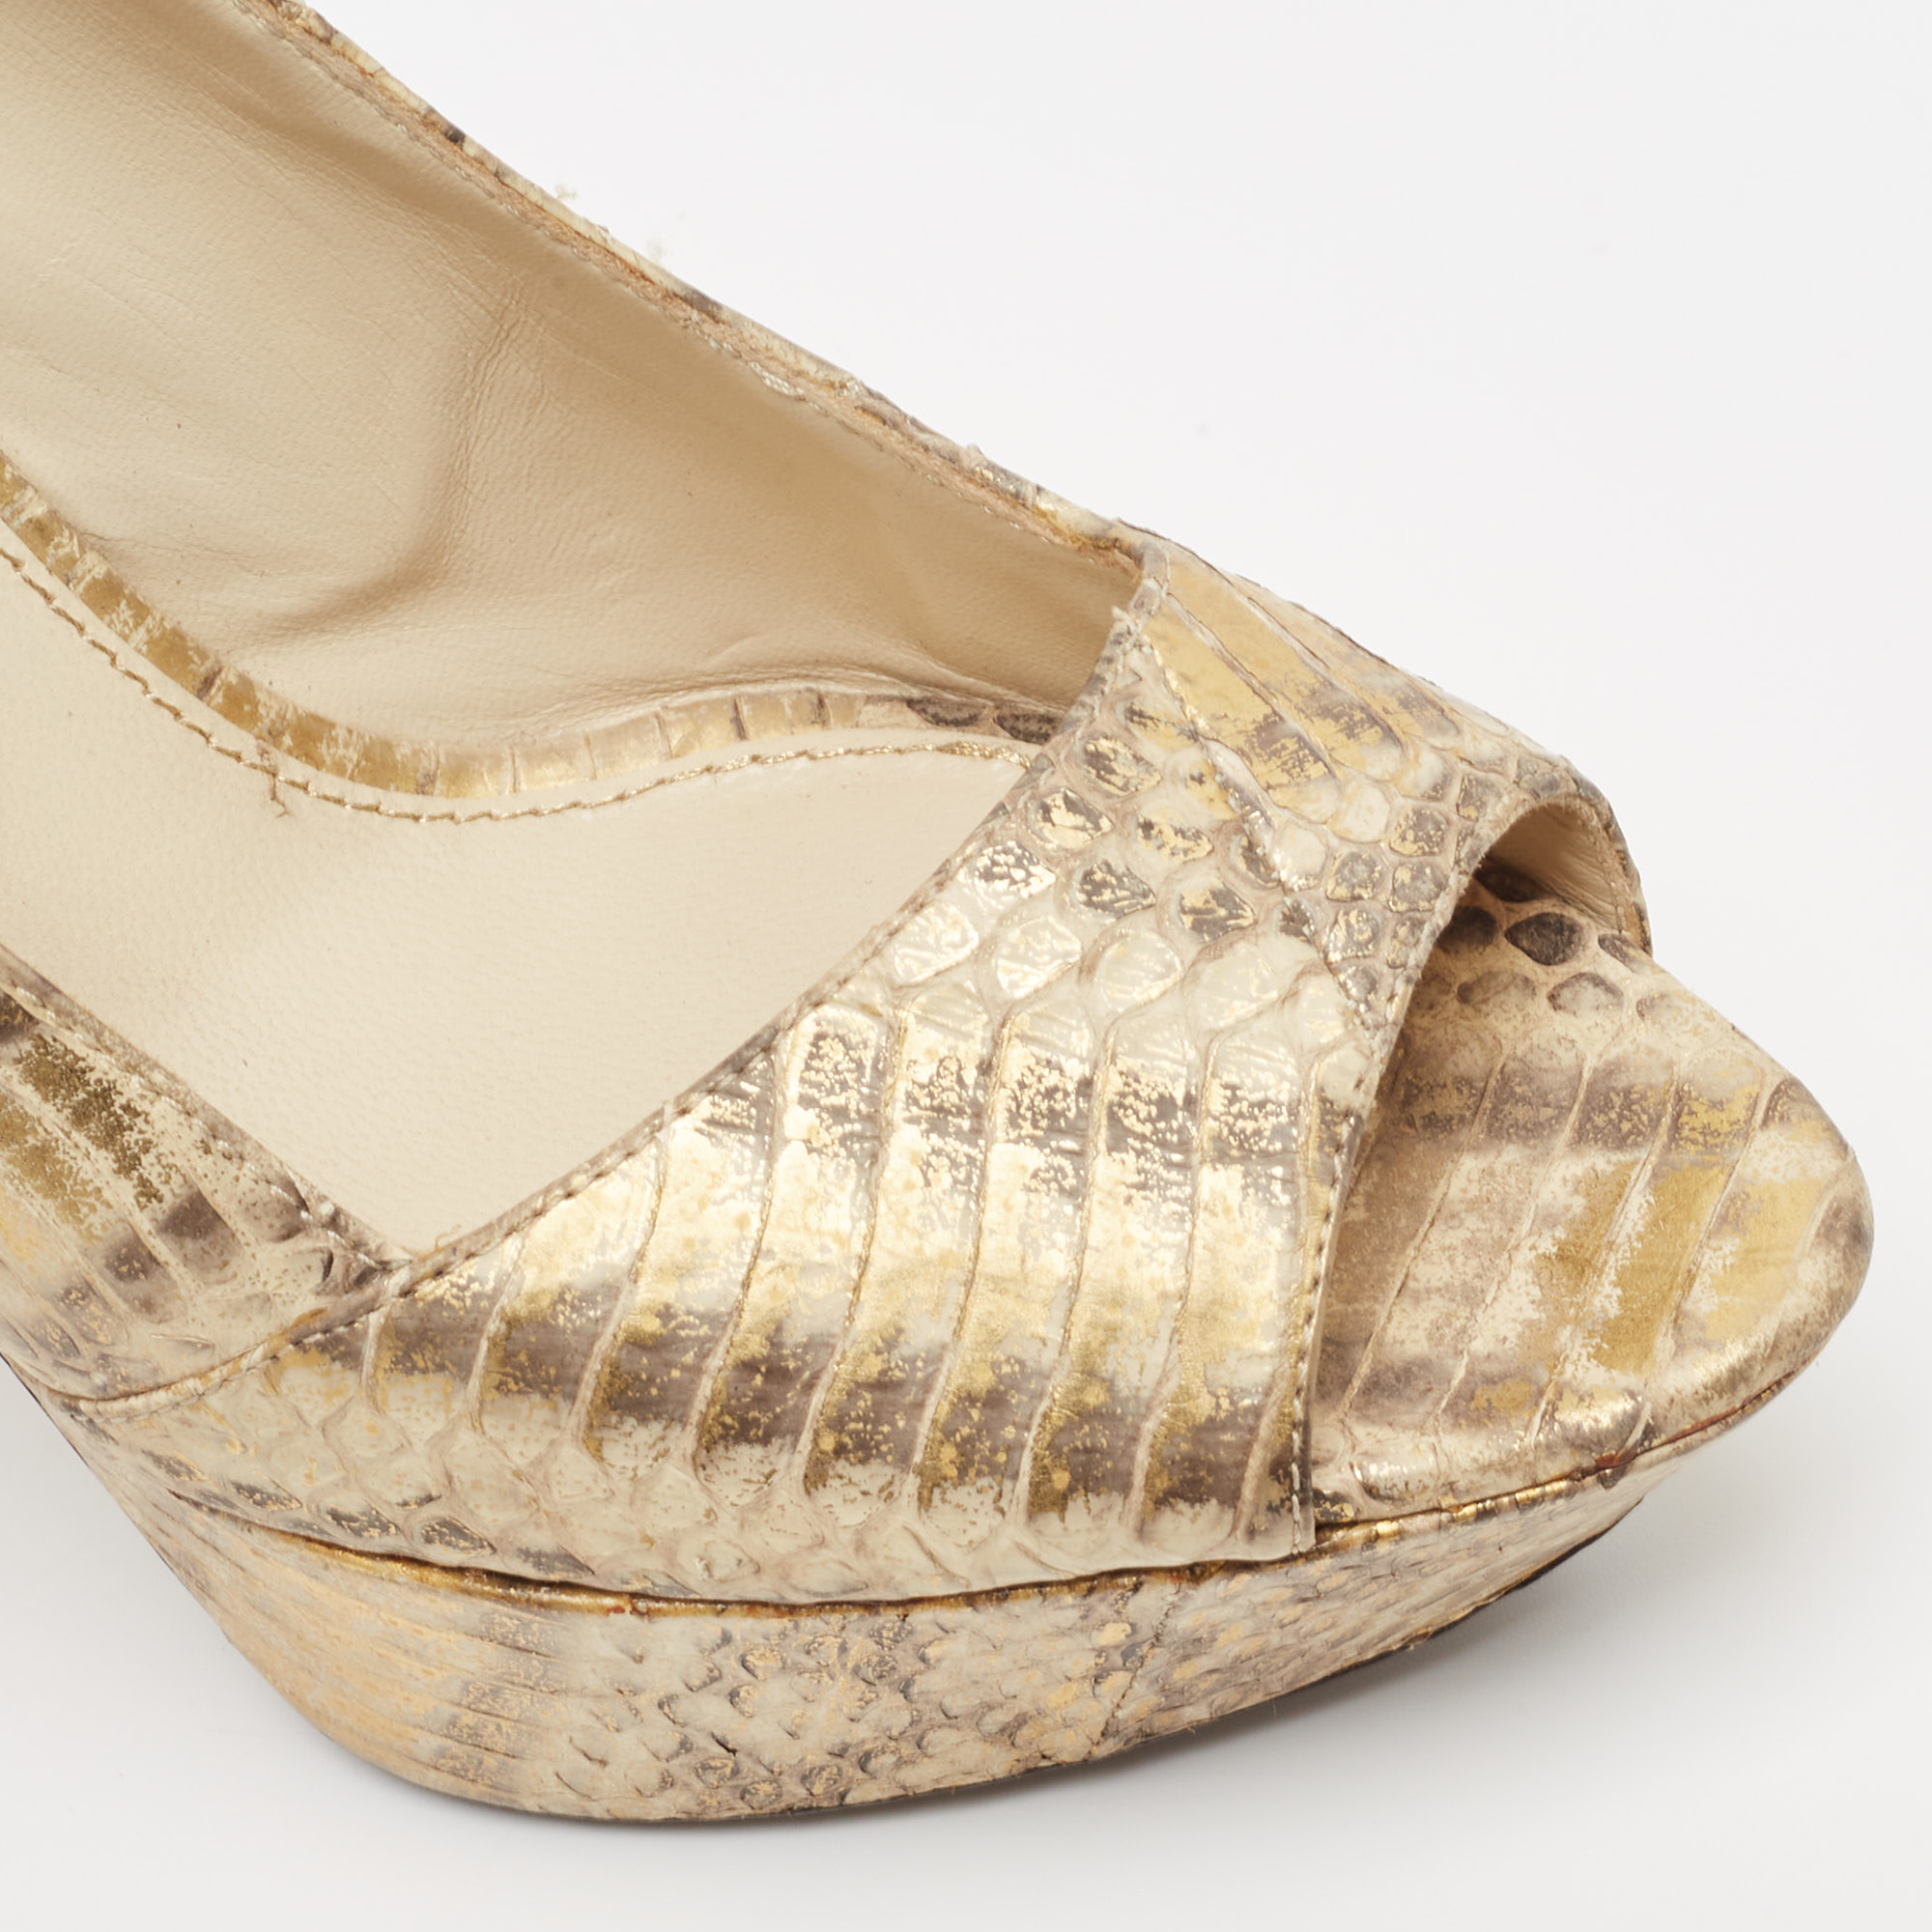 Sergio Rossi Beige/Gold Python Embossed Leather Peep Toe Pumps Size 38.5